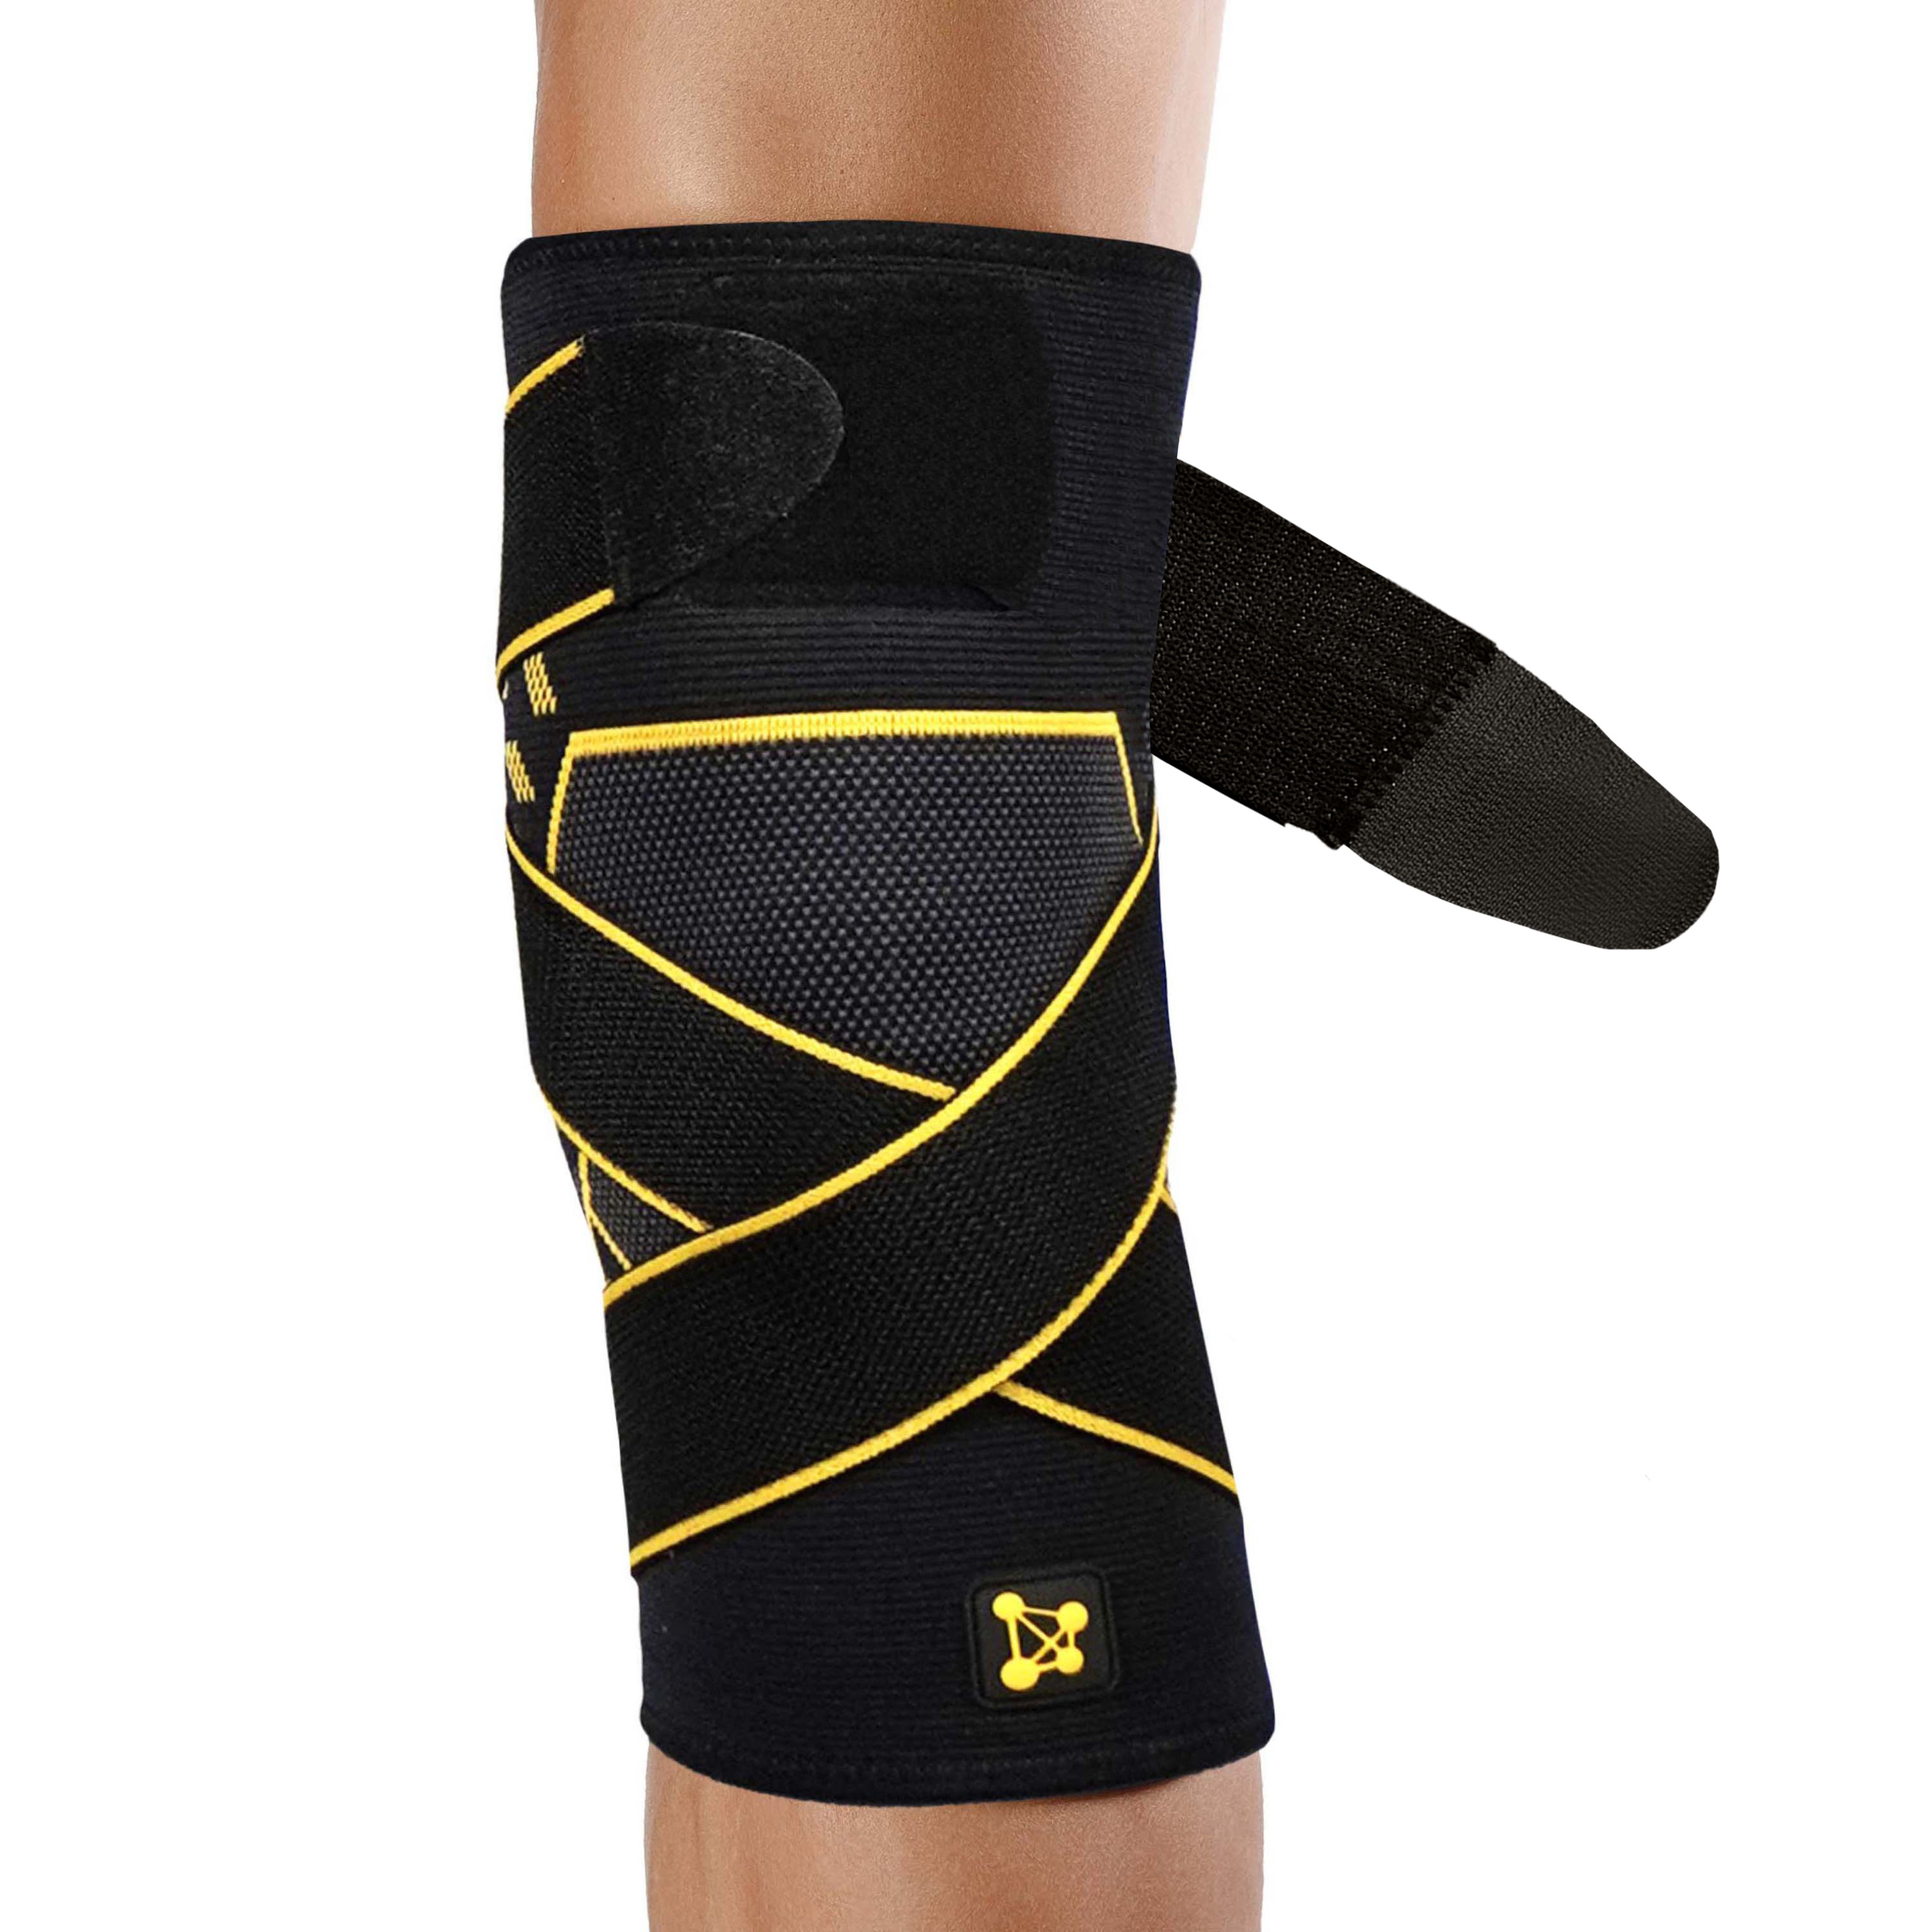 CopperJoint Releases New Knee Sleeves For Weightlifting 